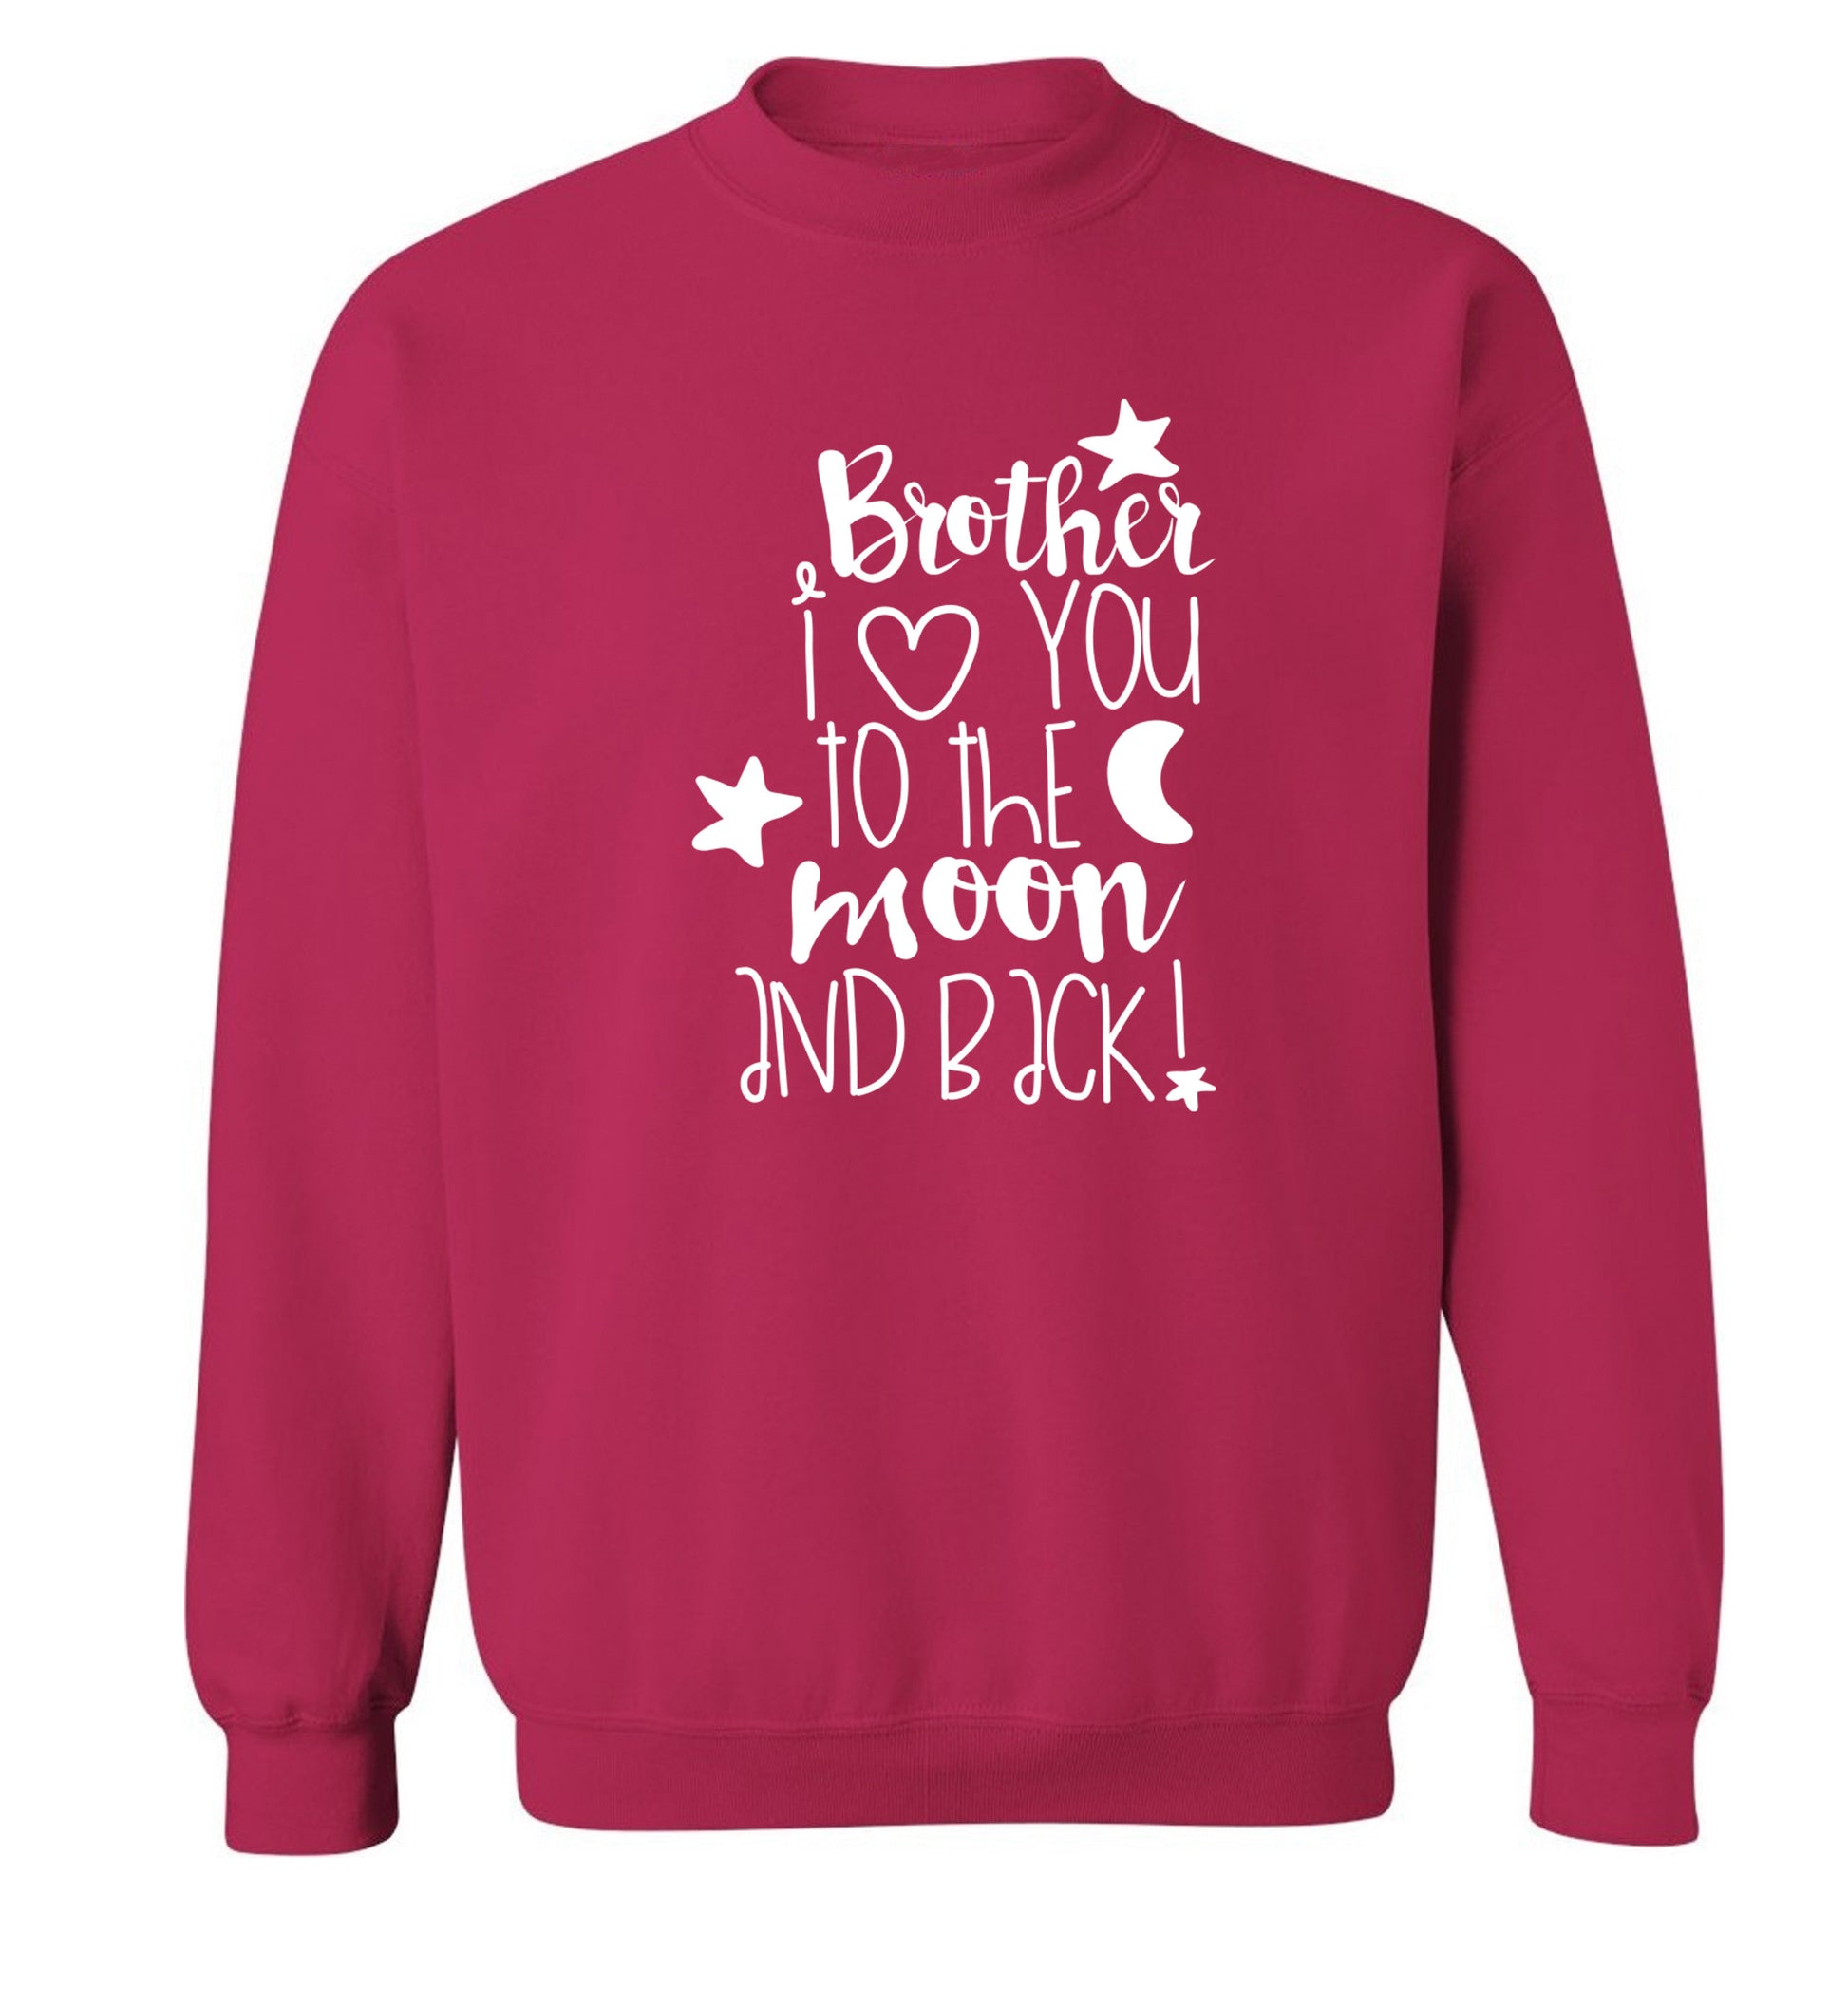 Brother I love you to the moon and back Adult's unisex pink  sweater XL